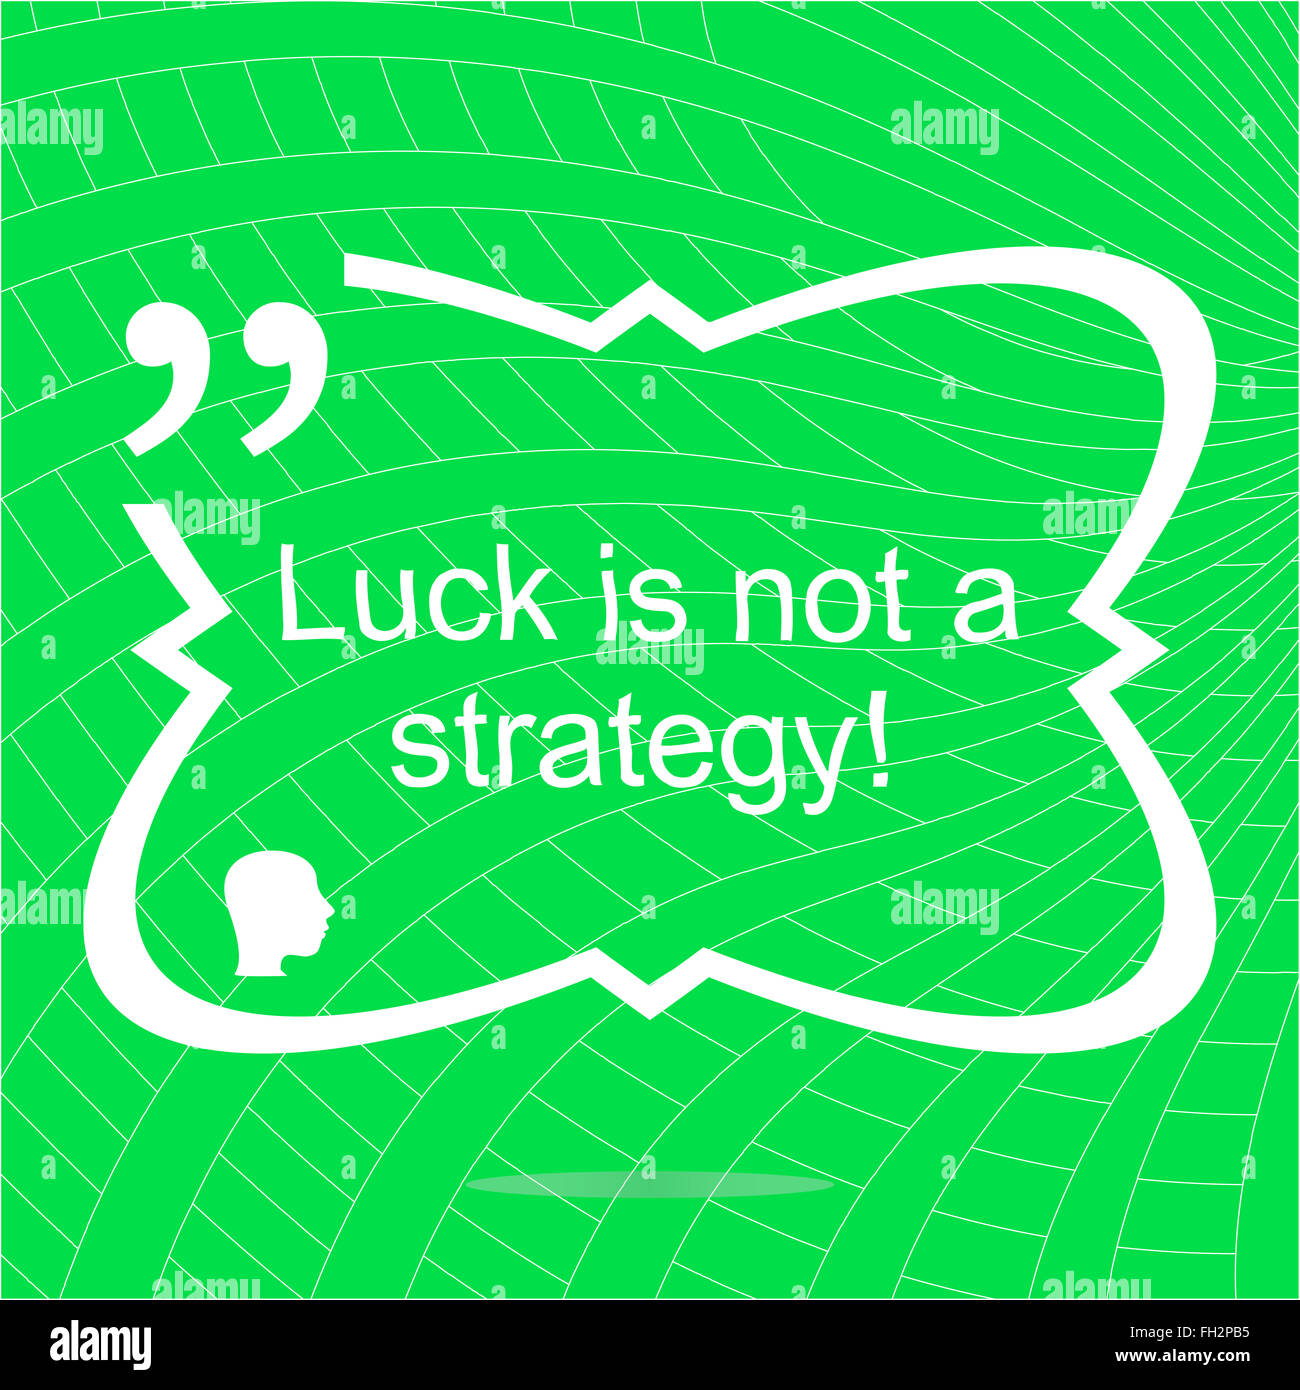 luck is not strategy. Inspirational motivational quote. Simple trendy design. Positive quote Stock Photo